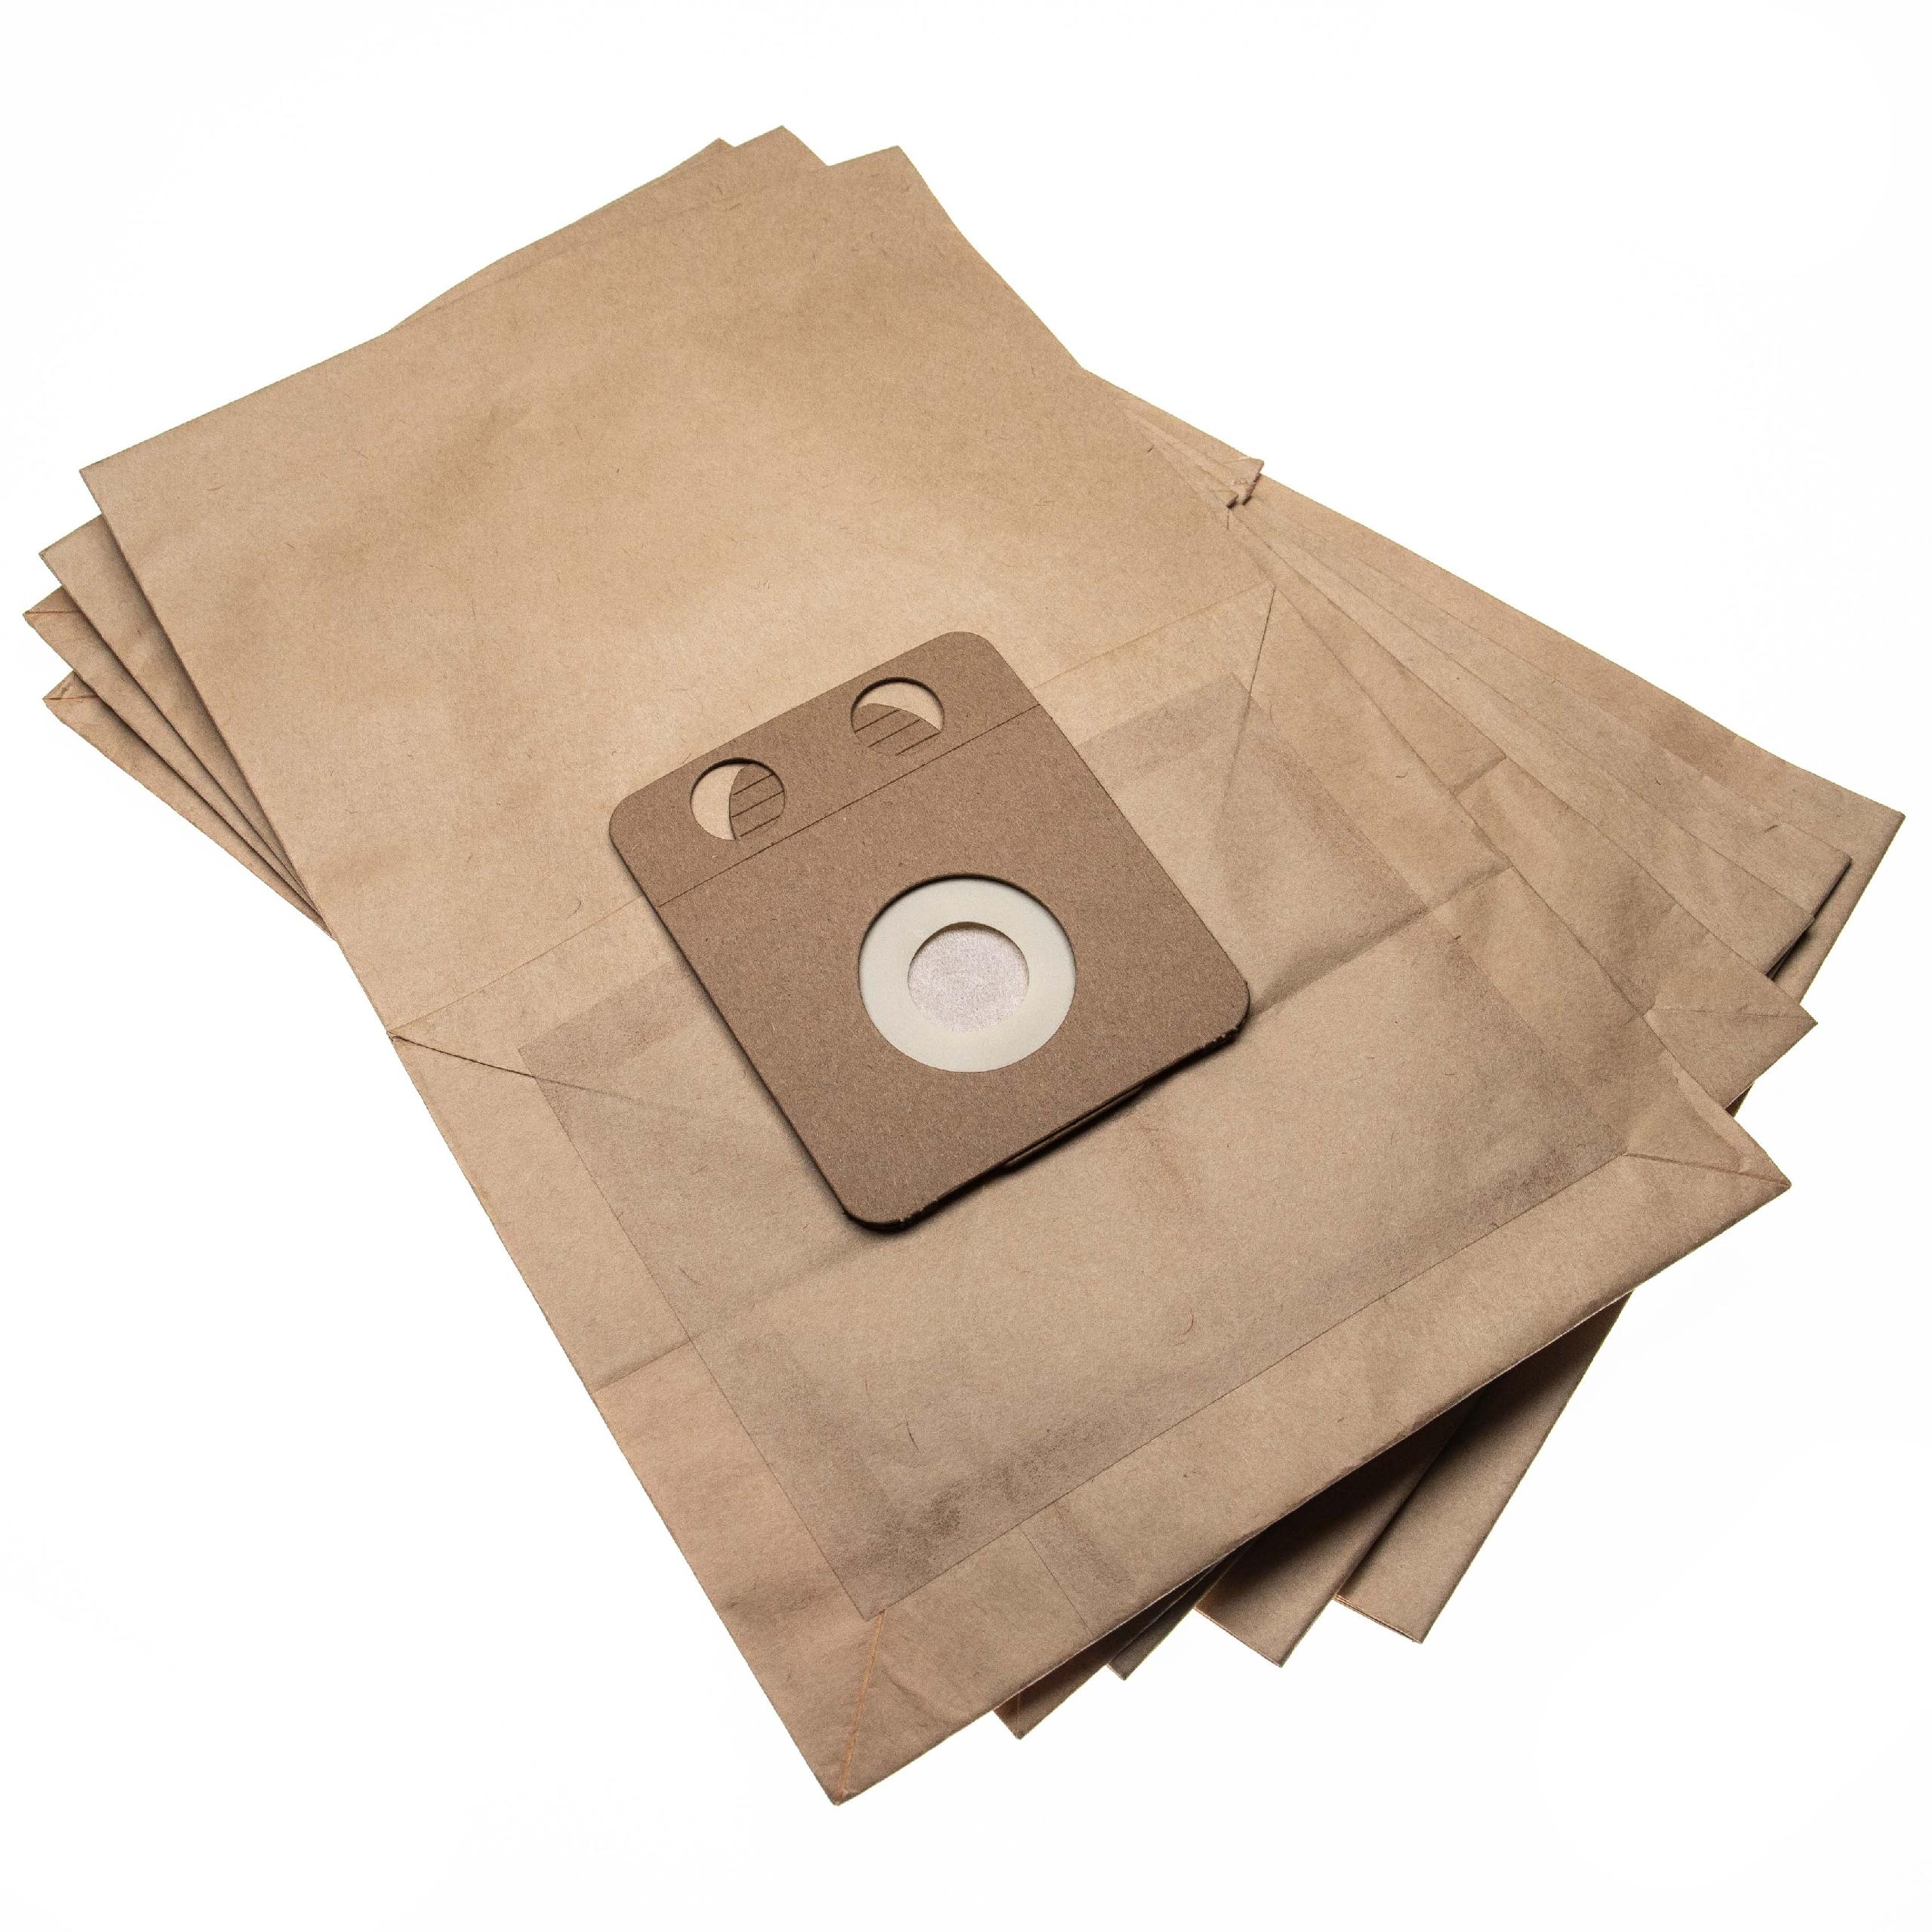 5x Vacuum Cleaner Bag replaces Nilfisk 107413077 for Nilfisk - paper